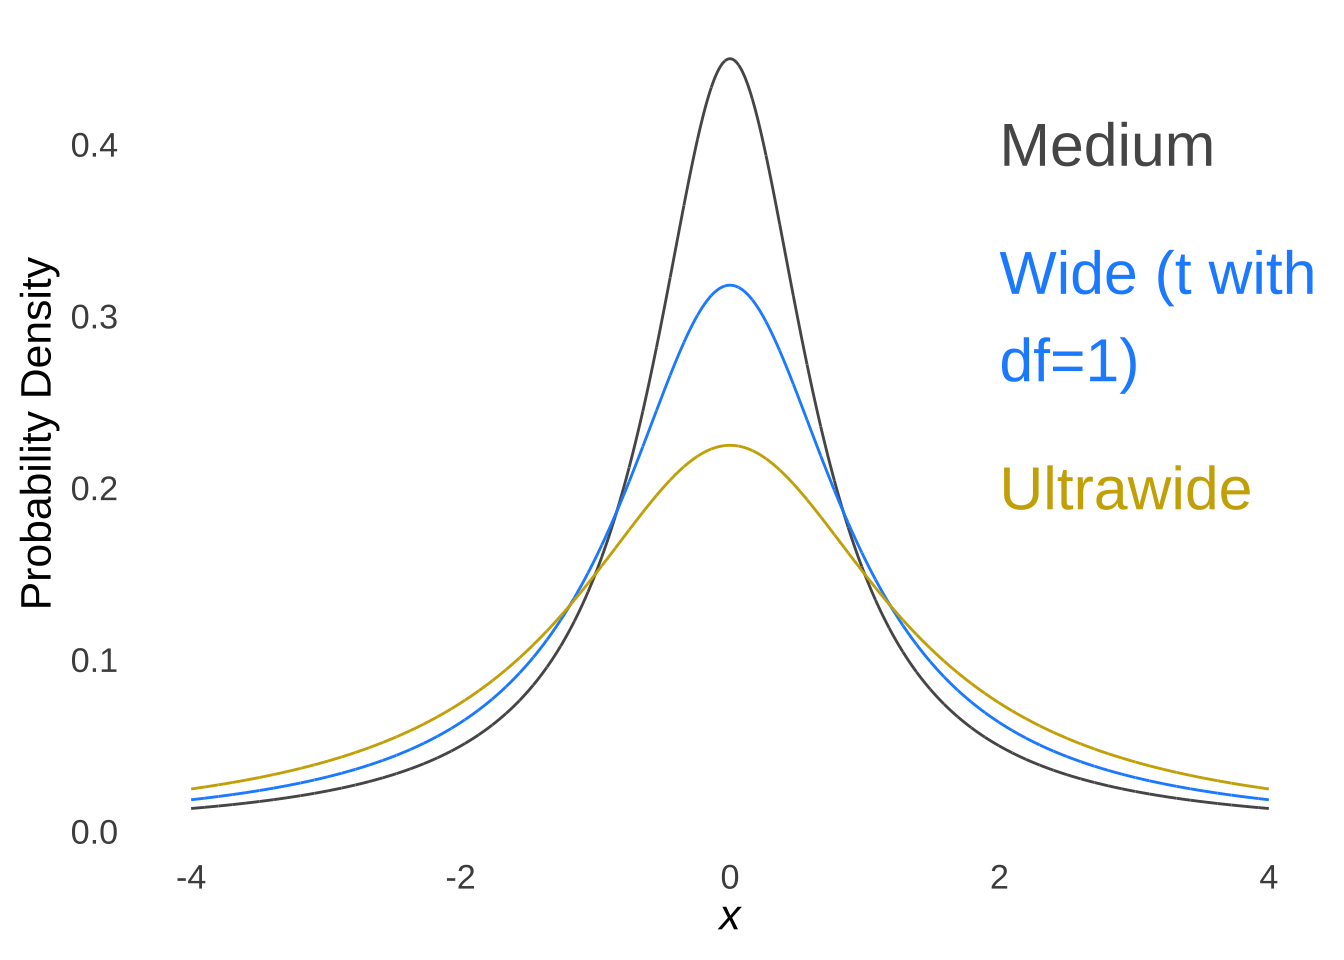 The Cauchy Distribution with Scale Parameters $\frac{1}{\sqrt{2}}$ (for Medium Priors), $1$ (for Wide Priors), and $\sqrt{2}$ (for Ultra-Wide Priors)